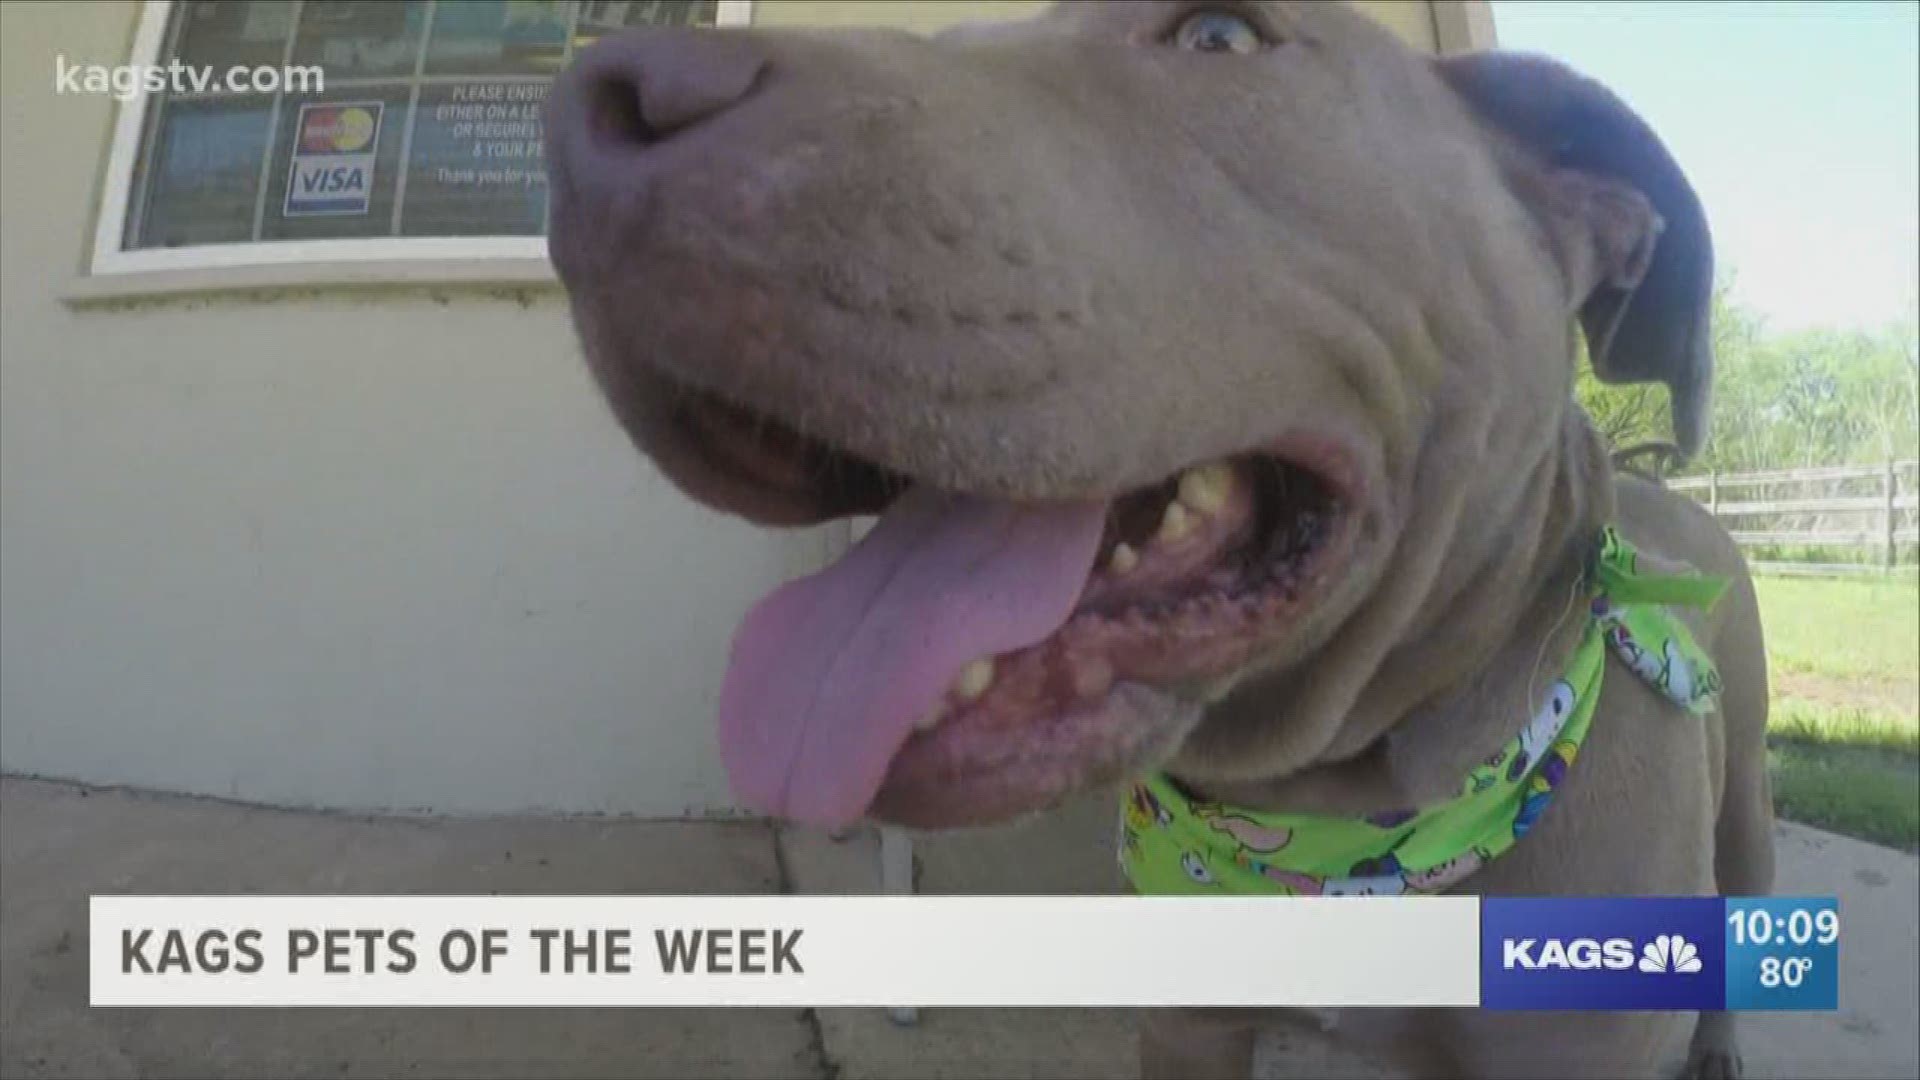 EVERY WEEK WE FEATURE AN ANIMAL UP FOR ADOPTION.   GOOD NEWS IS THAT MOST OF THE PETS WE'VE SHOWN YOU-- HAVE BEEN ADOPTED.HOWEVER THERE'S STILL A FEW WHO CONTINUE TO WAIT FOR THEIR FOREVER HOMES. TONIGHT-- WE'RE SHOWING YOU AGAIN THESE DOGS AS OUR K-AG